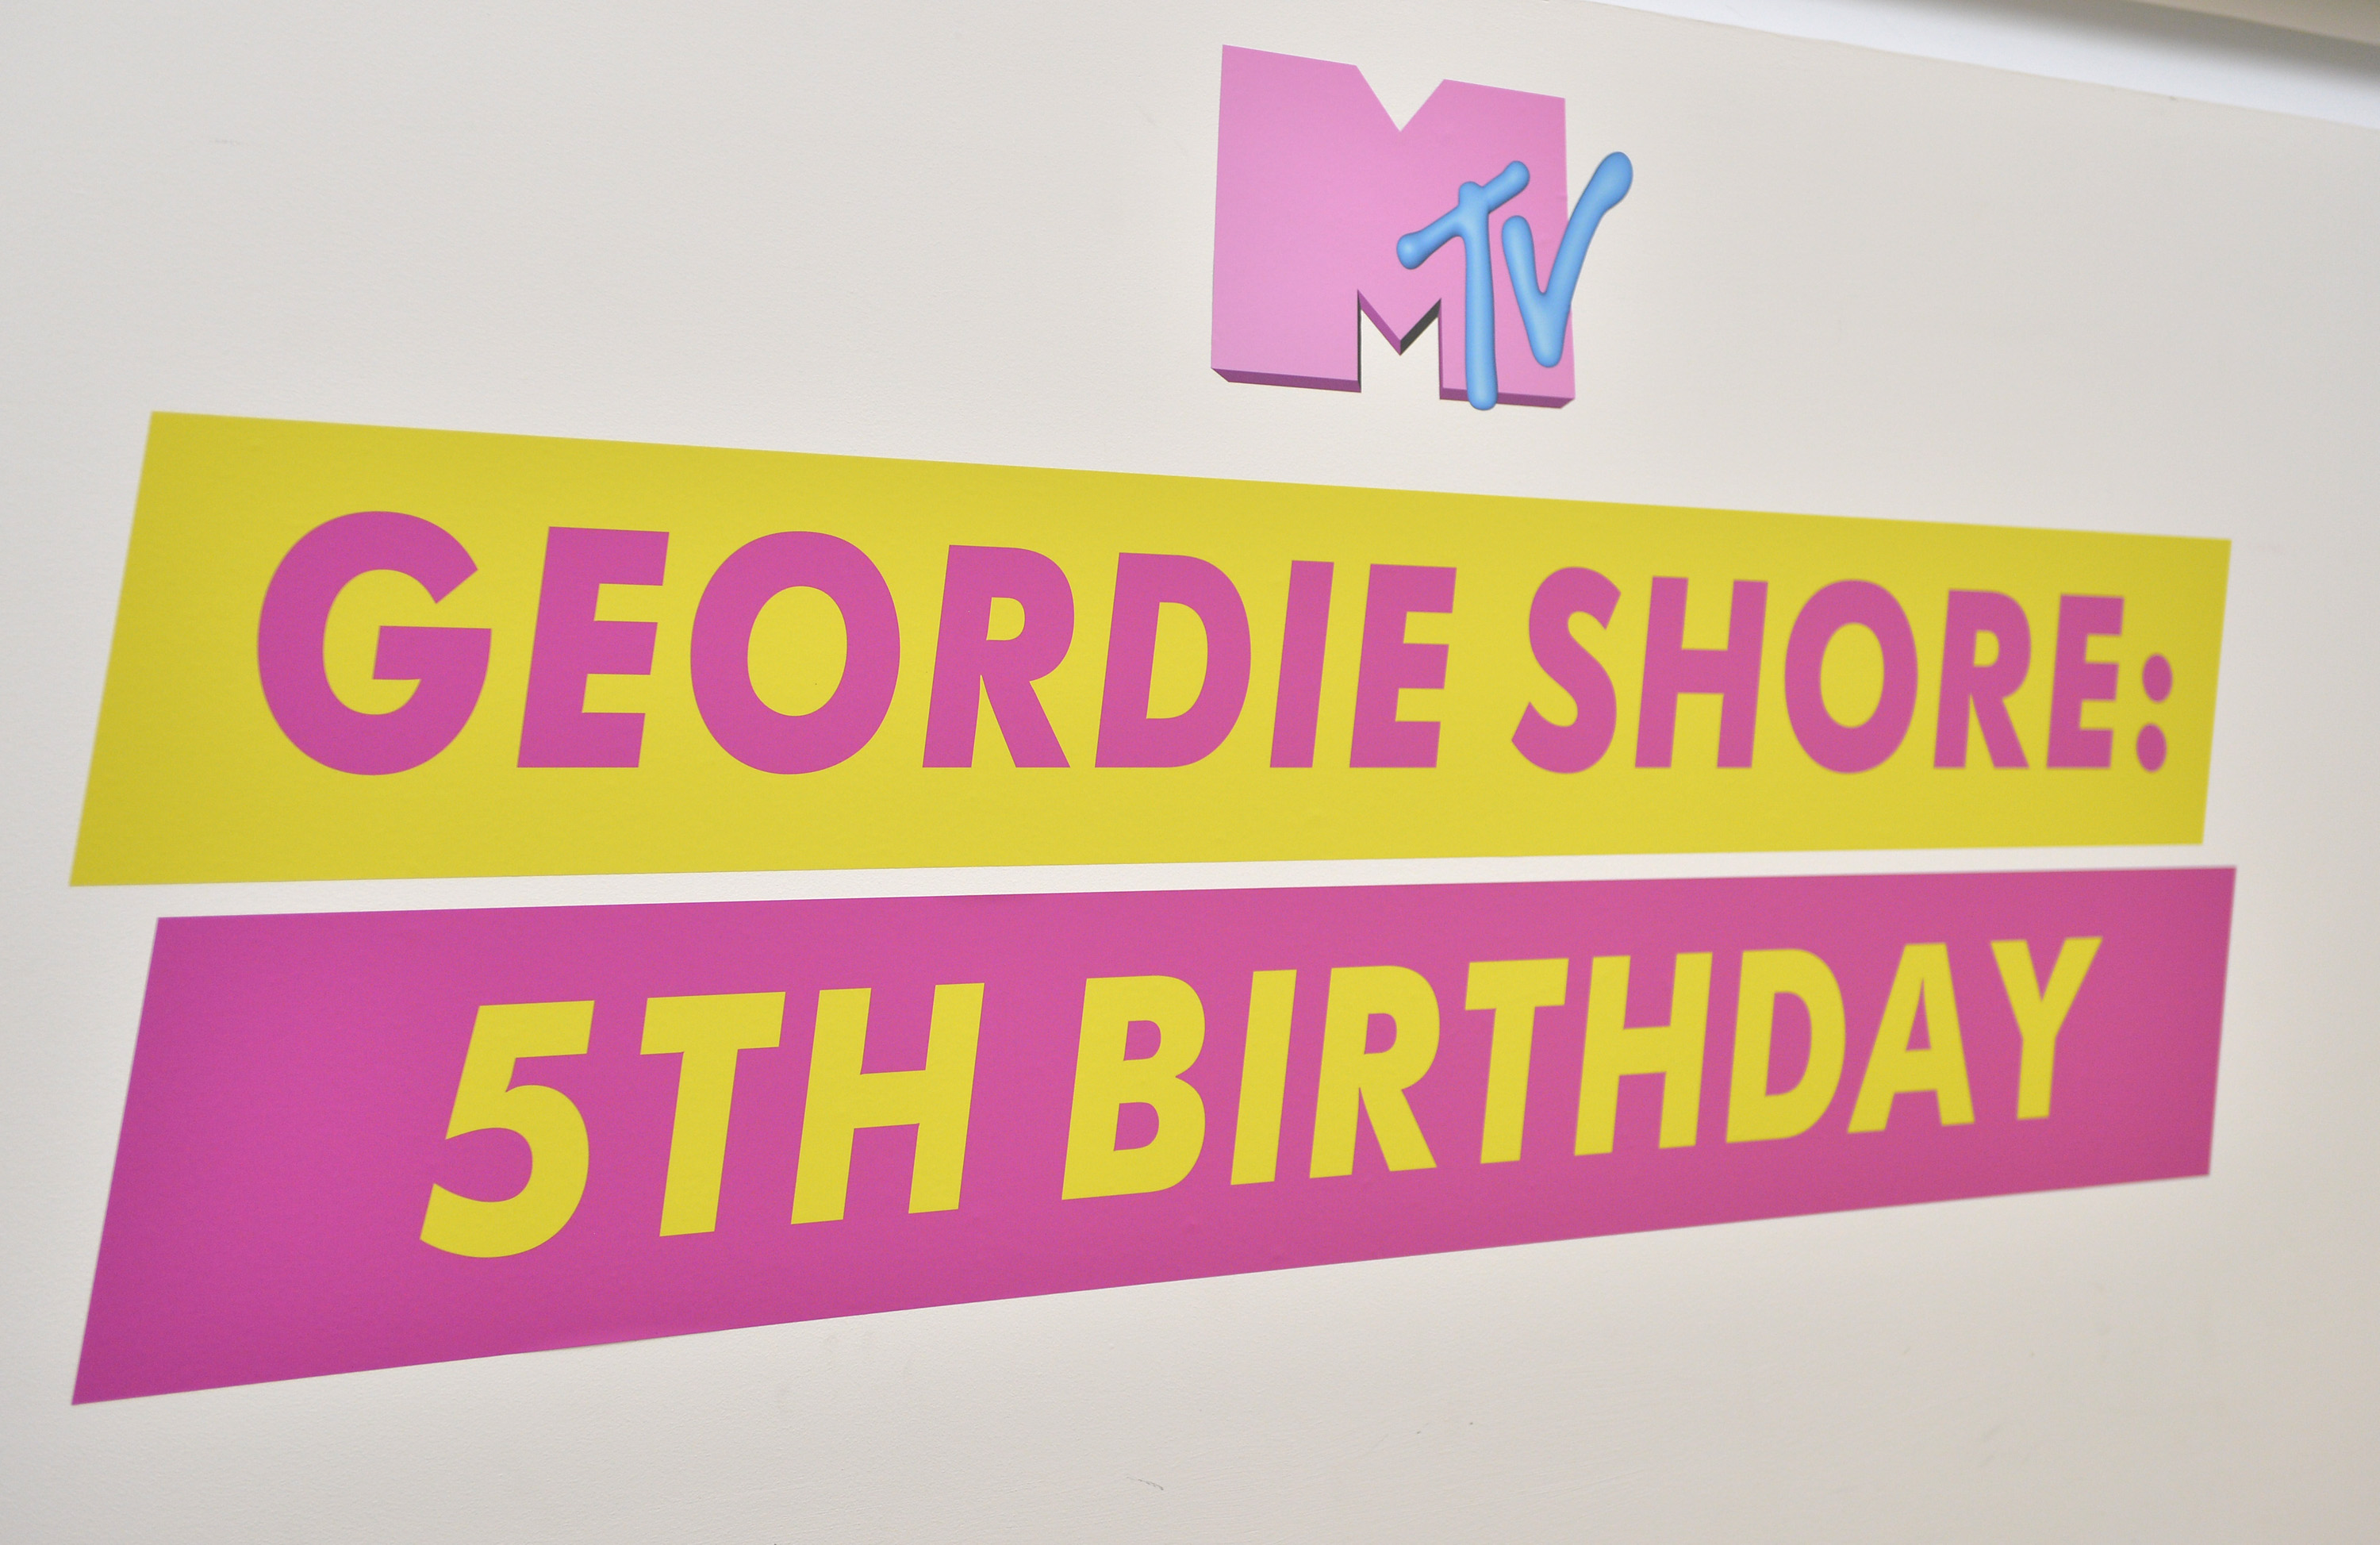 LONDON, ENGLAND - MAY 24: Geordie Shore Cast celebrate their fifth birthday at MTV London on May 24, 2016 in London, England. (Photo by Anthony Harvey/Getty Images)